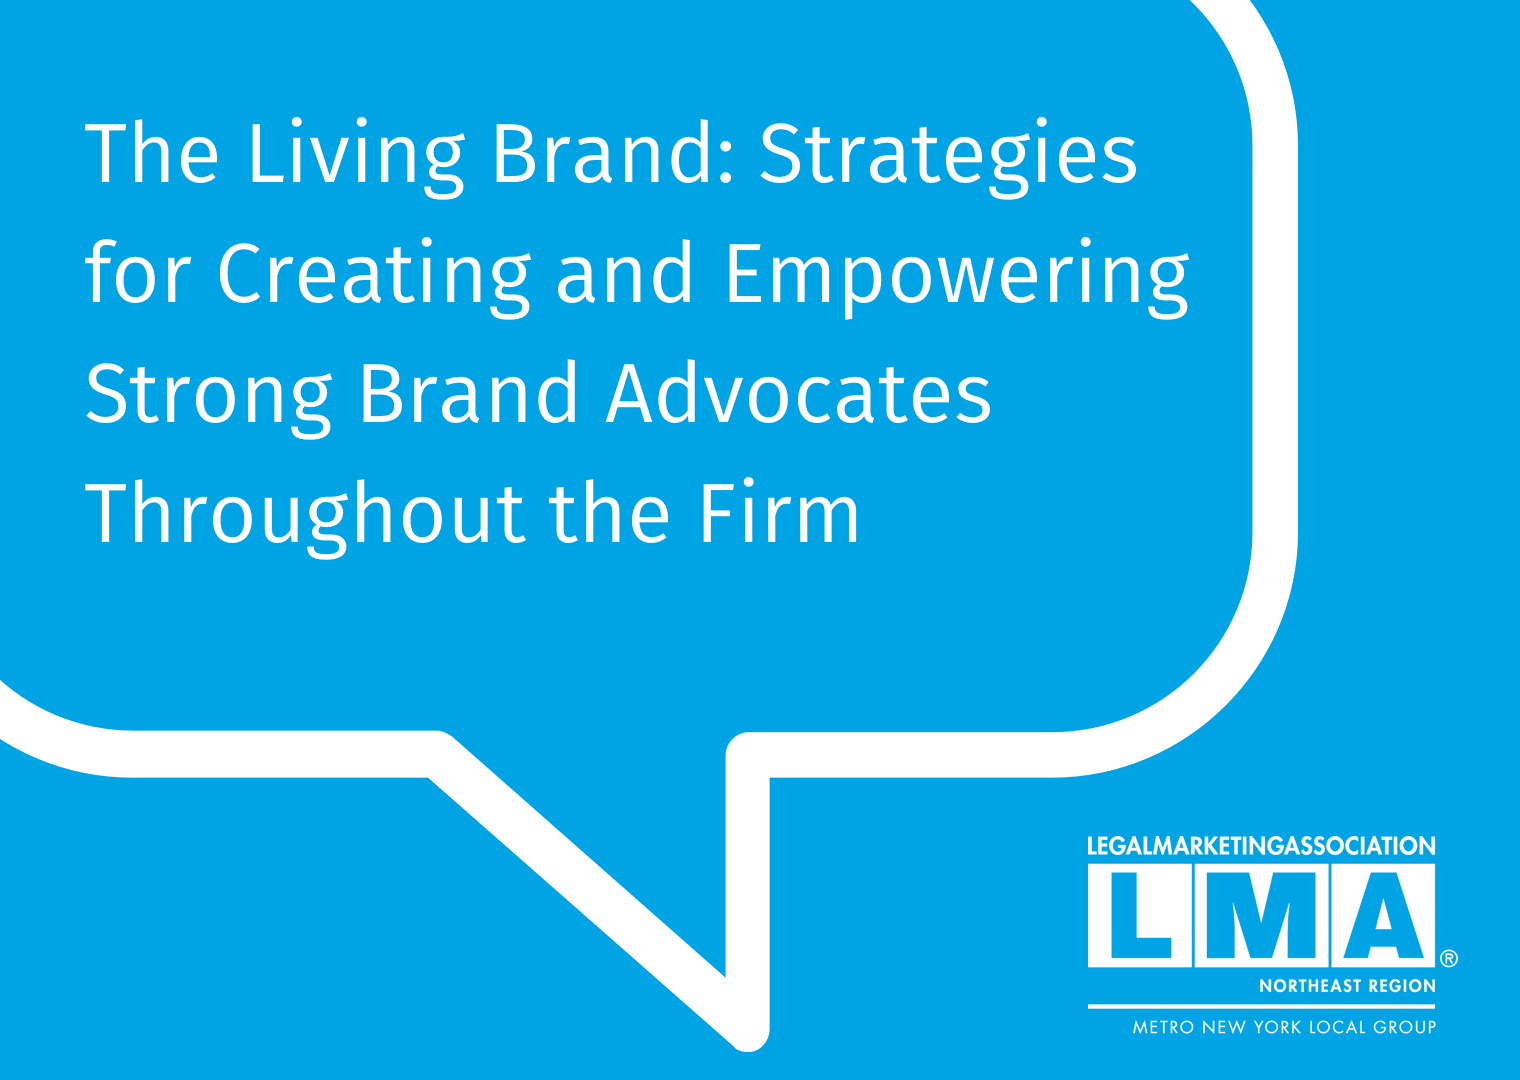 Image about Internal Brand Activation LMA NYC